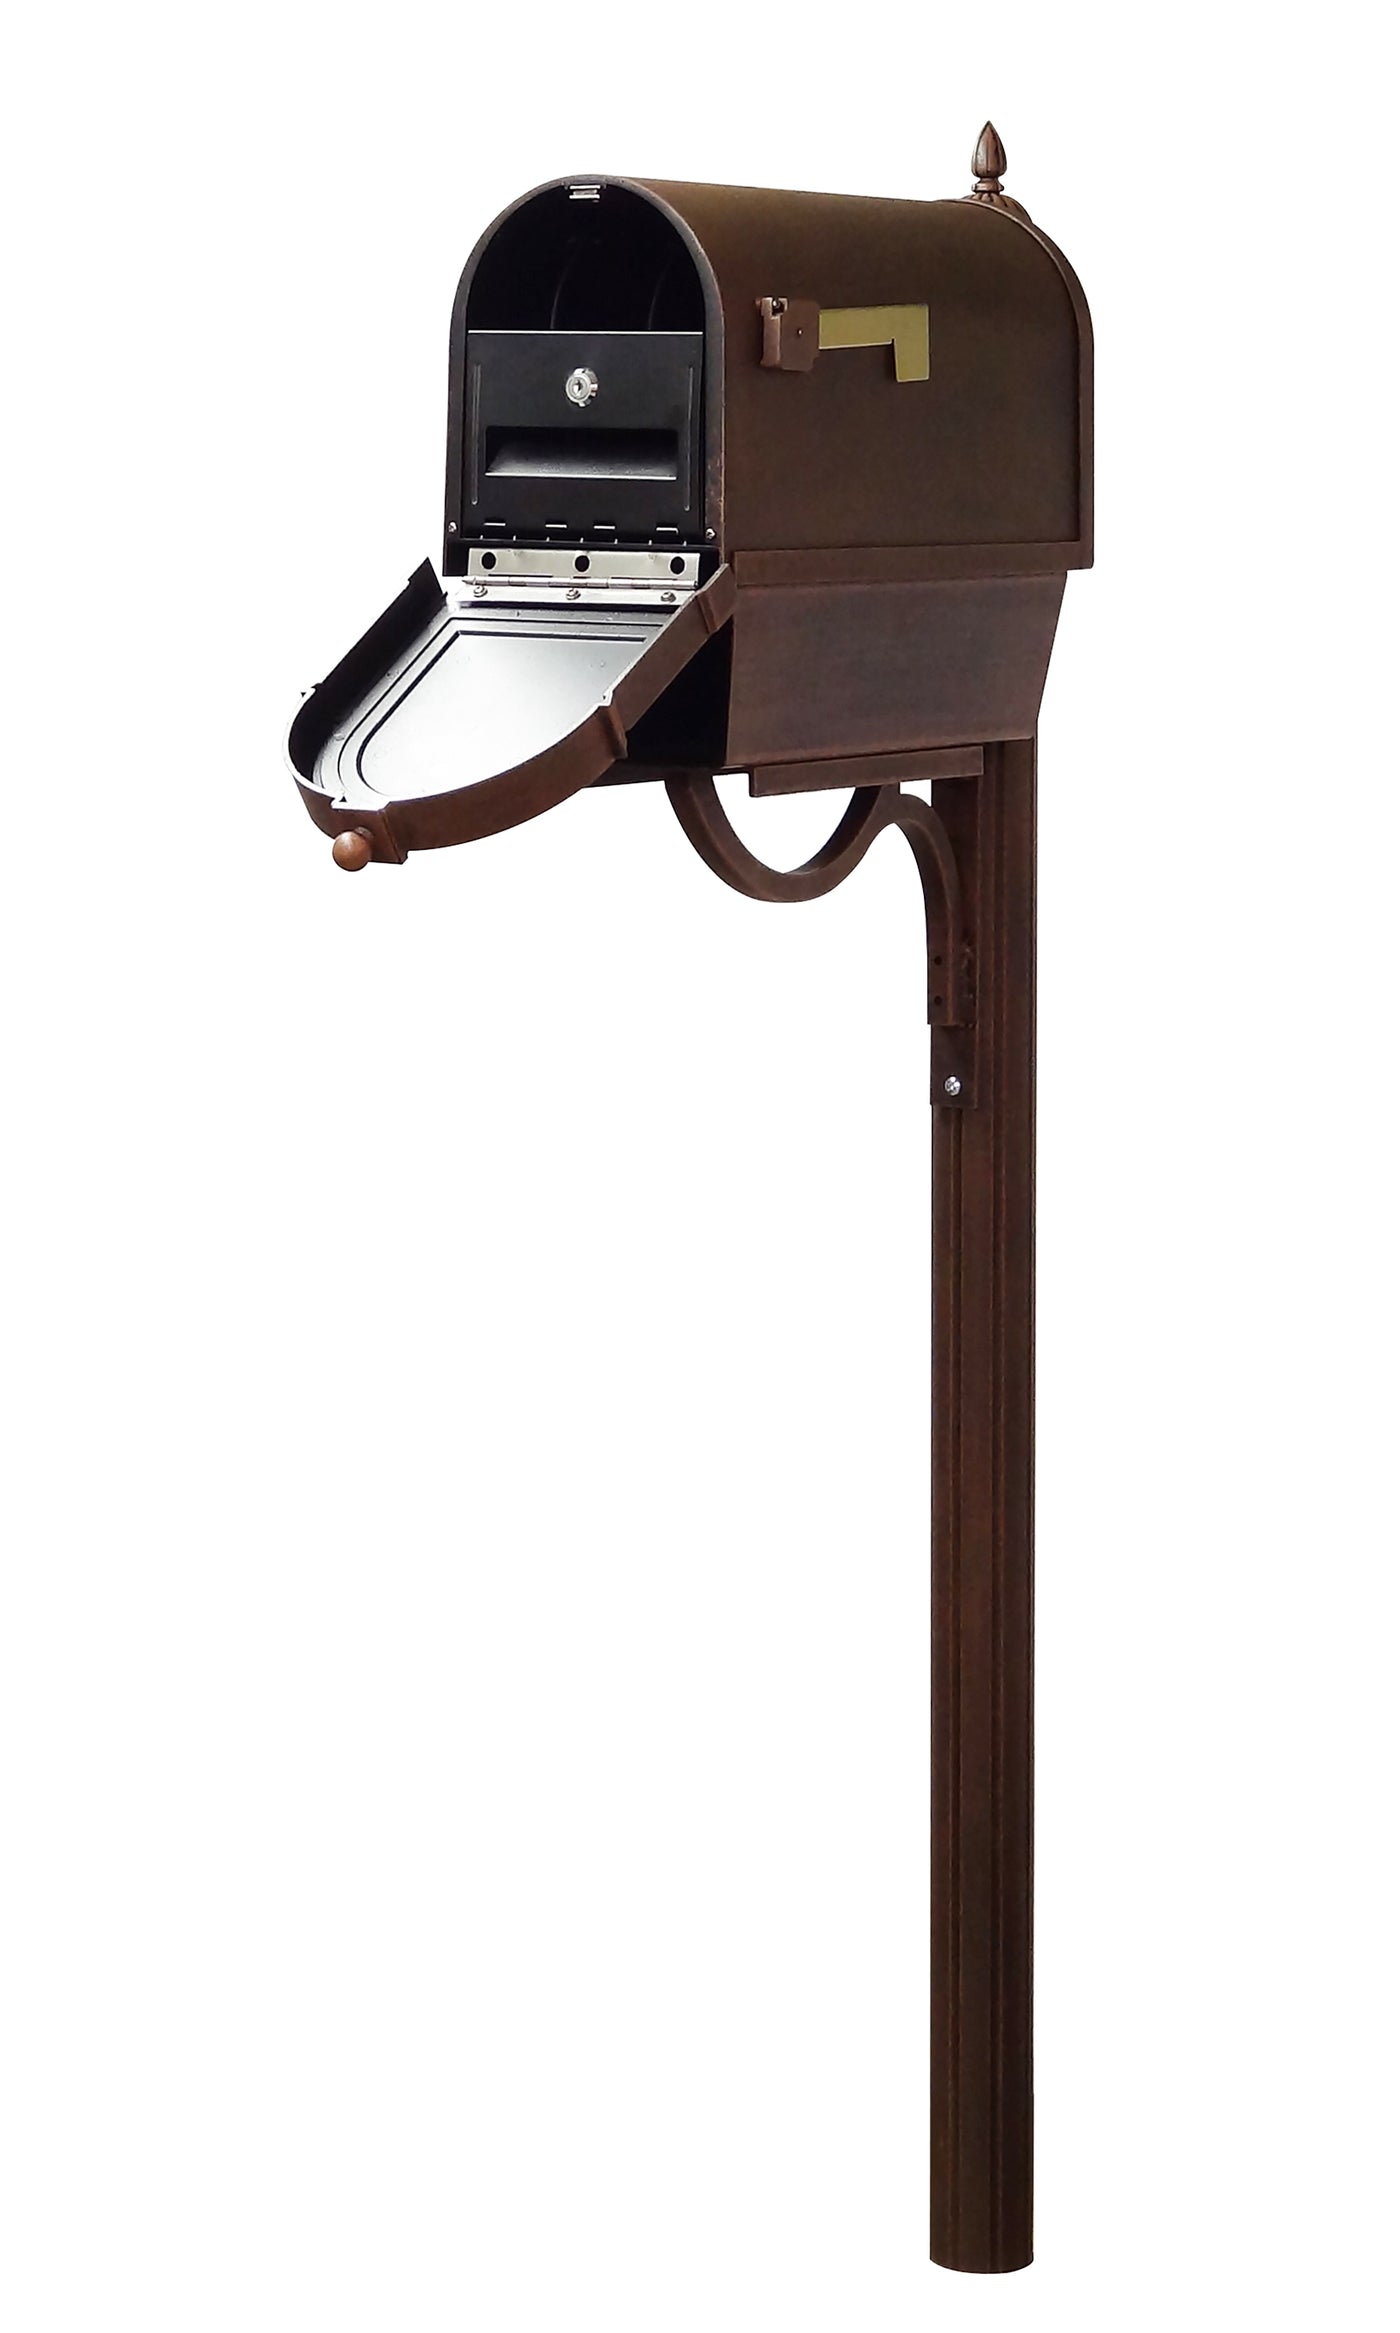 Berkshire Curbside Mailbox with Newspaper Tube, Locking Insert and Richland Mailbox Post